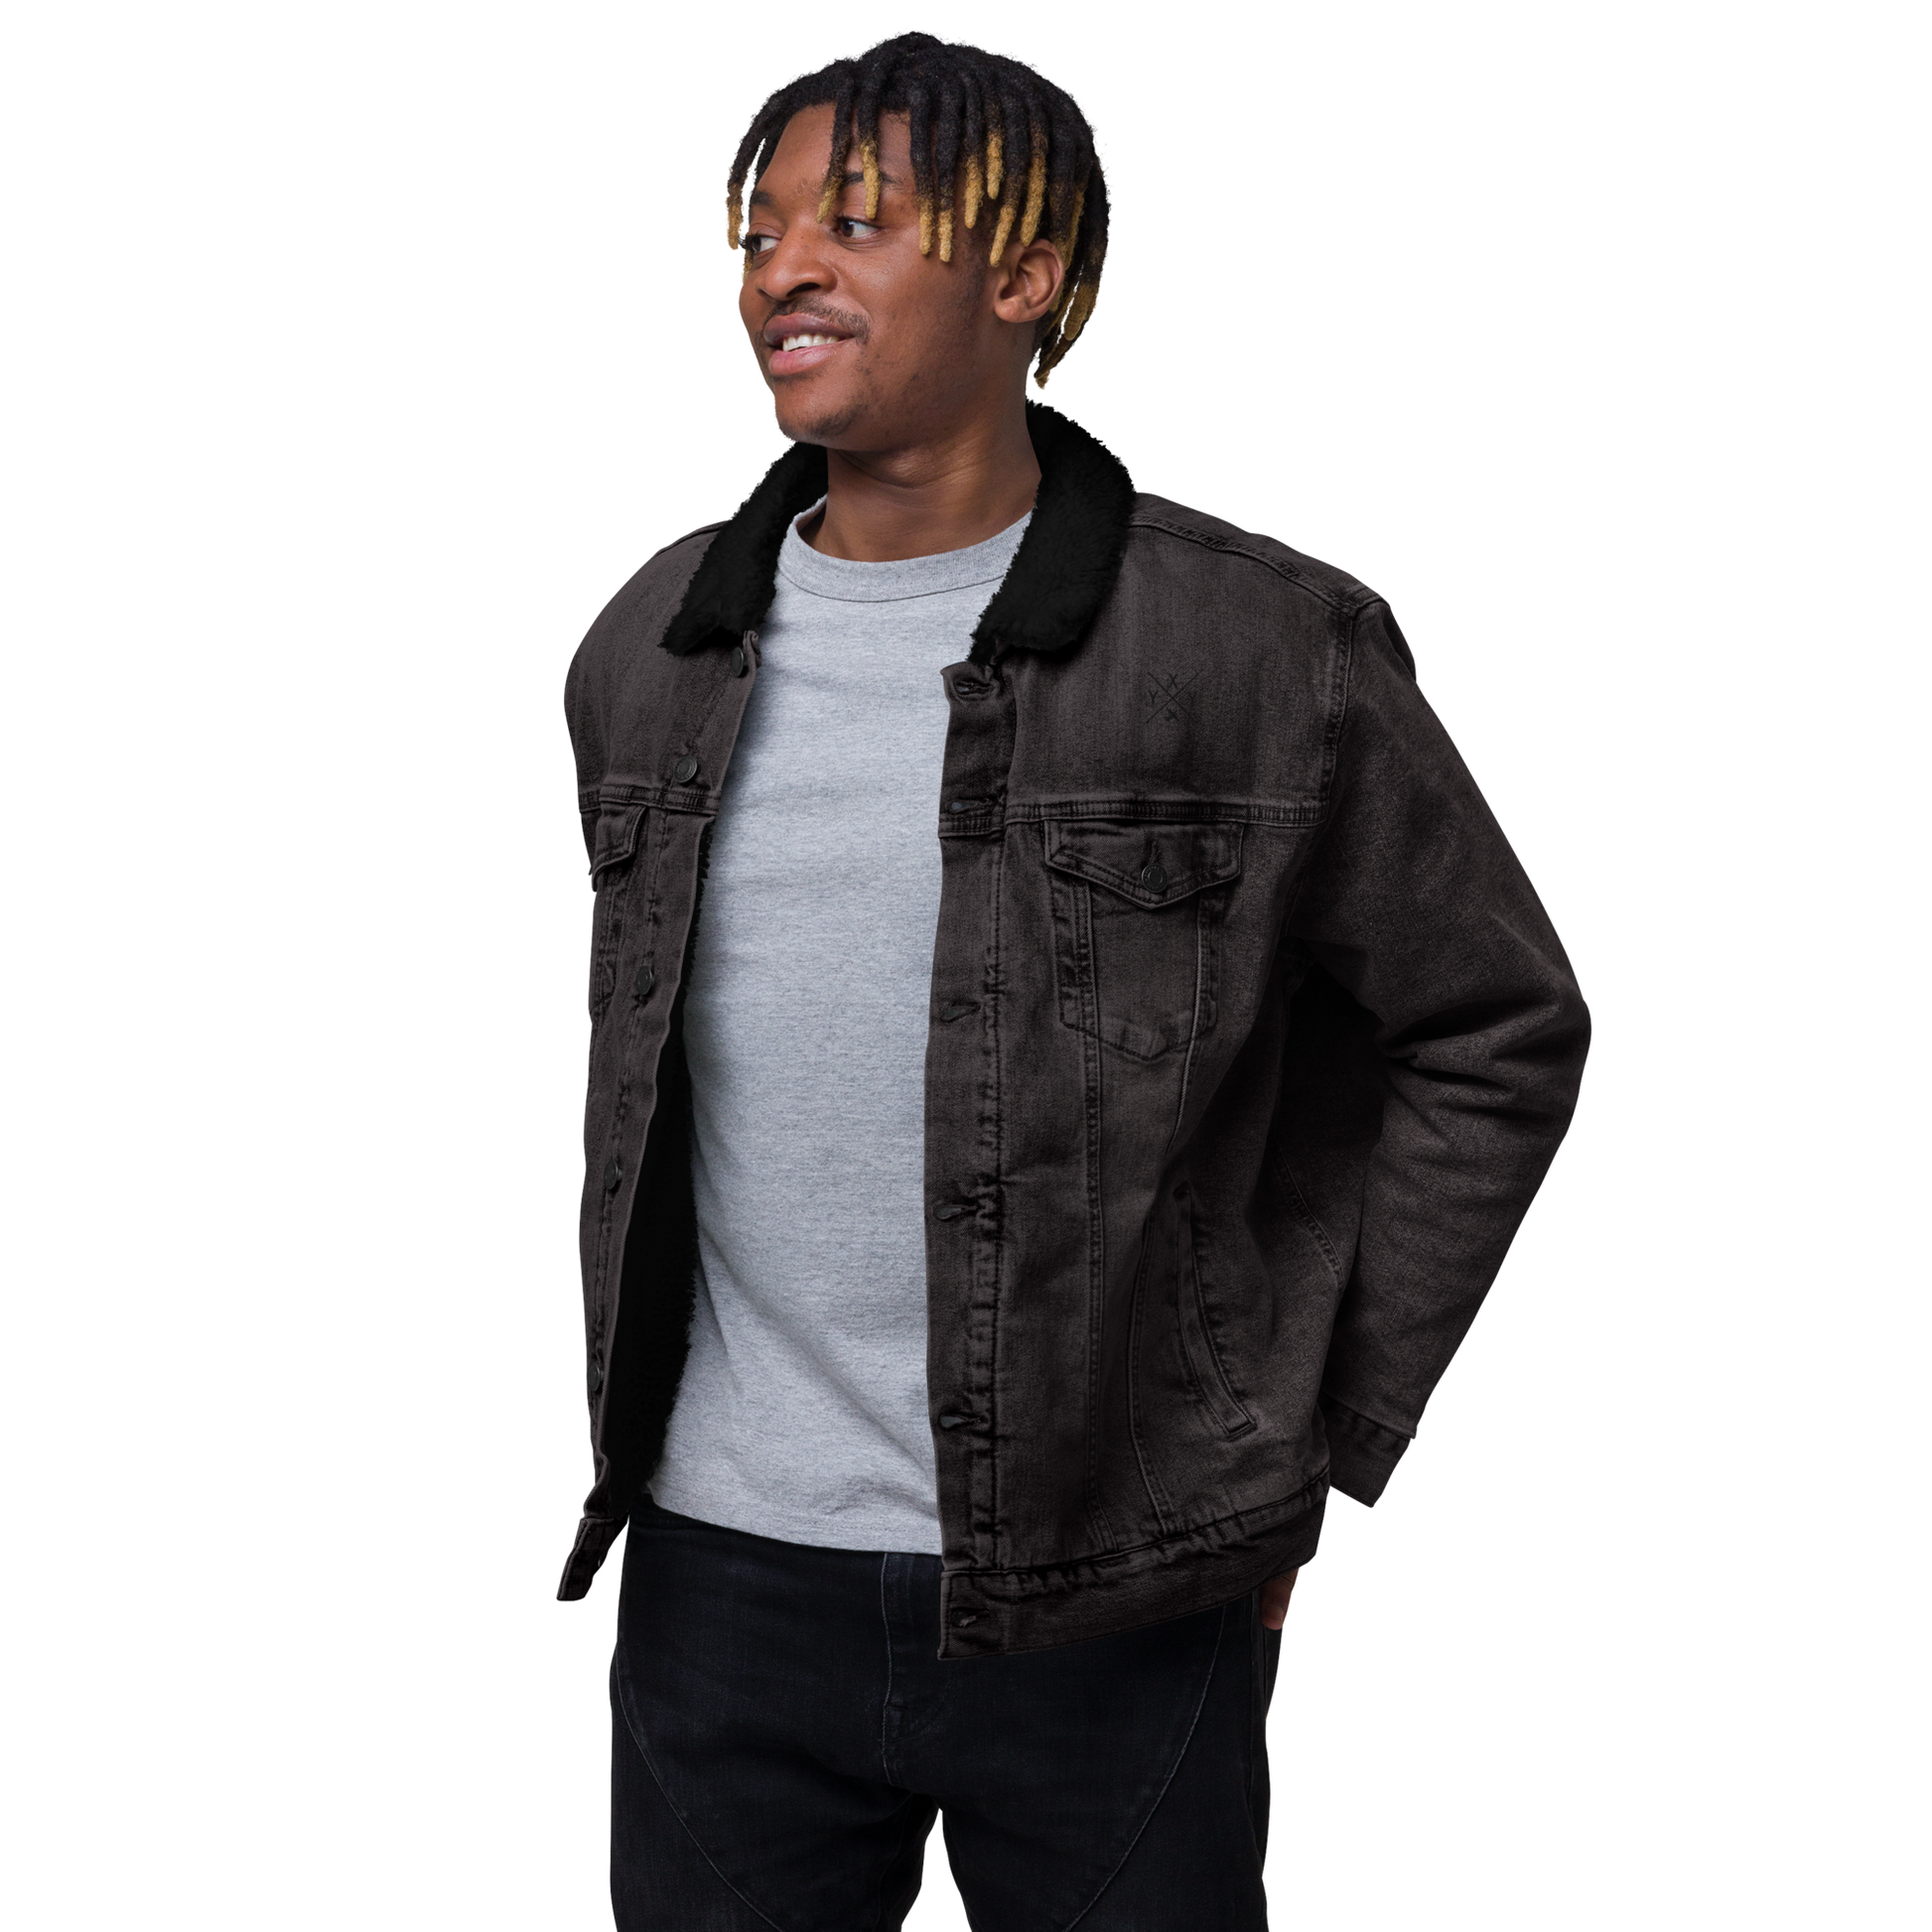 YHM Designs - YXY Whitehorse Denim Sherpa Jacket - Crossed-X Design with Airport Code and Vintage Propliner - Black & White Embroidery - Image 08